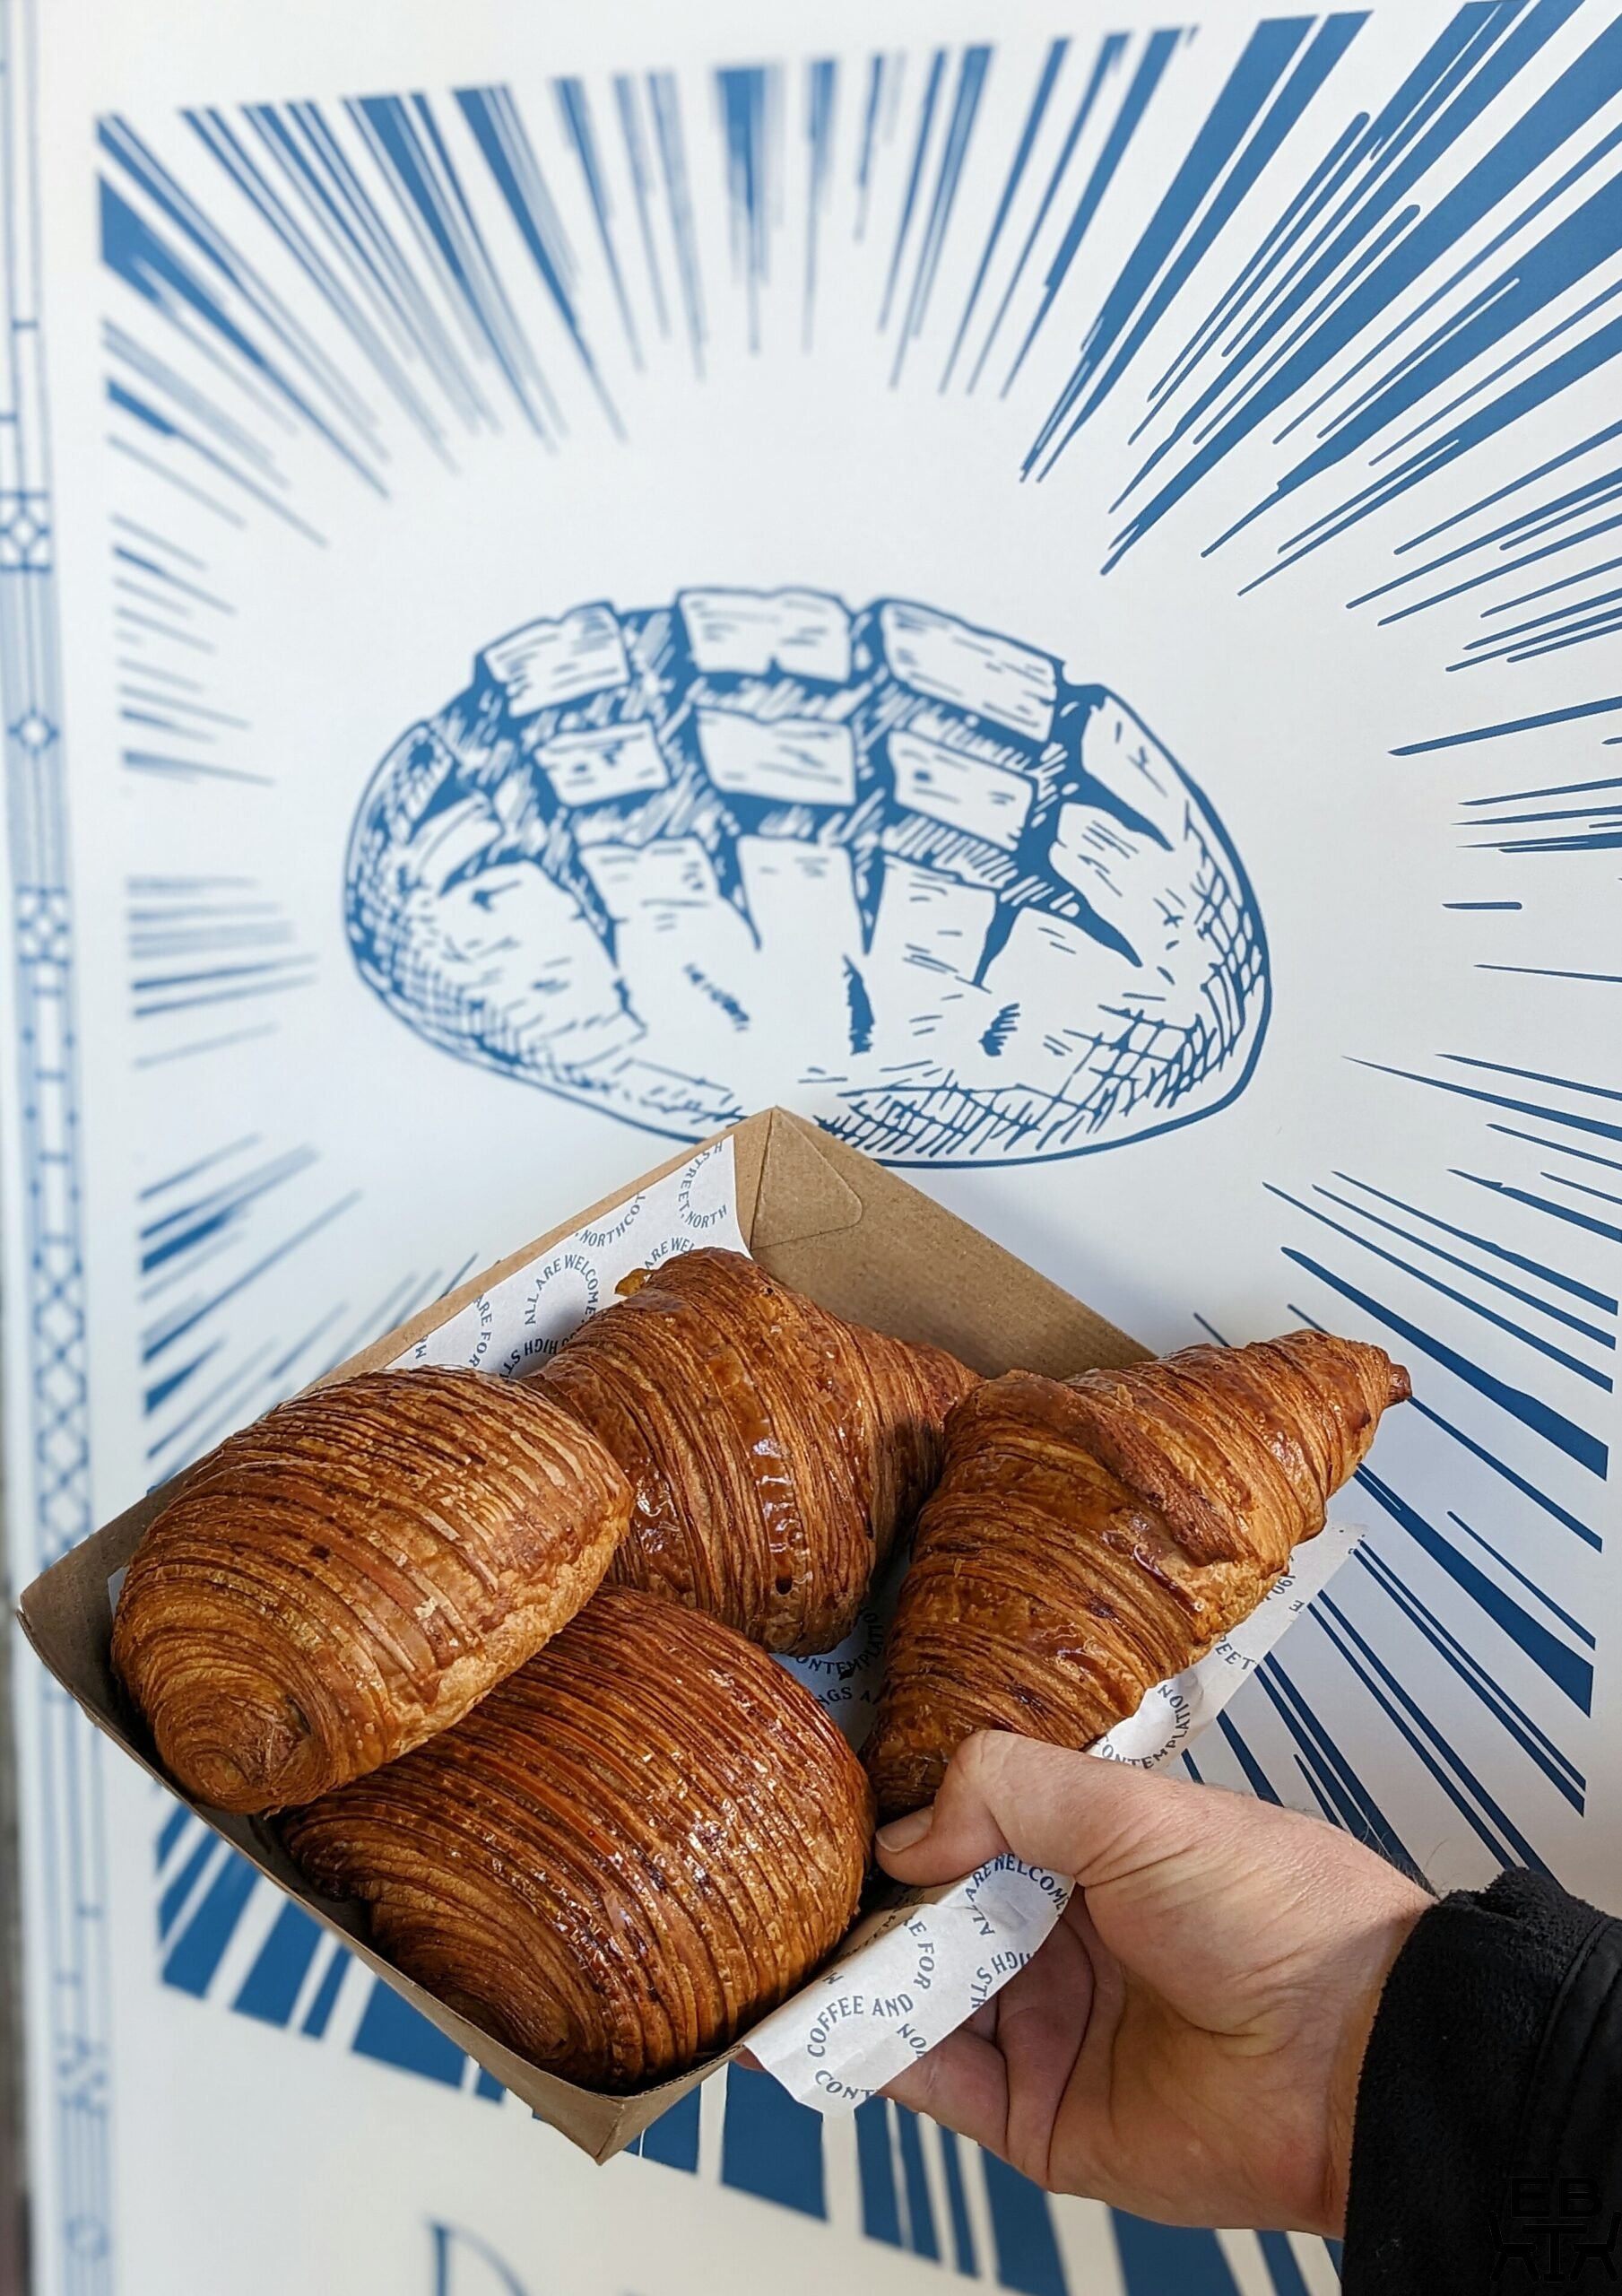 melbourne best croissants all are welcome